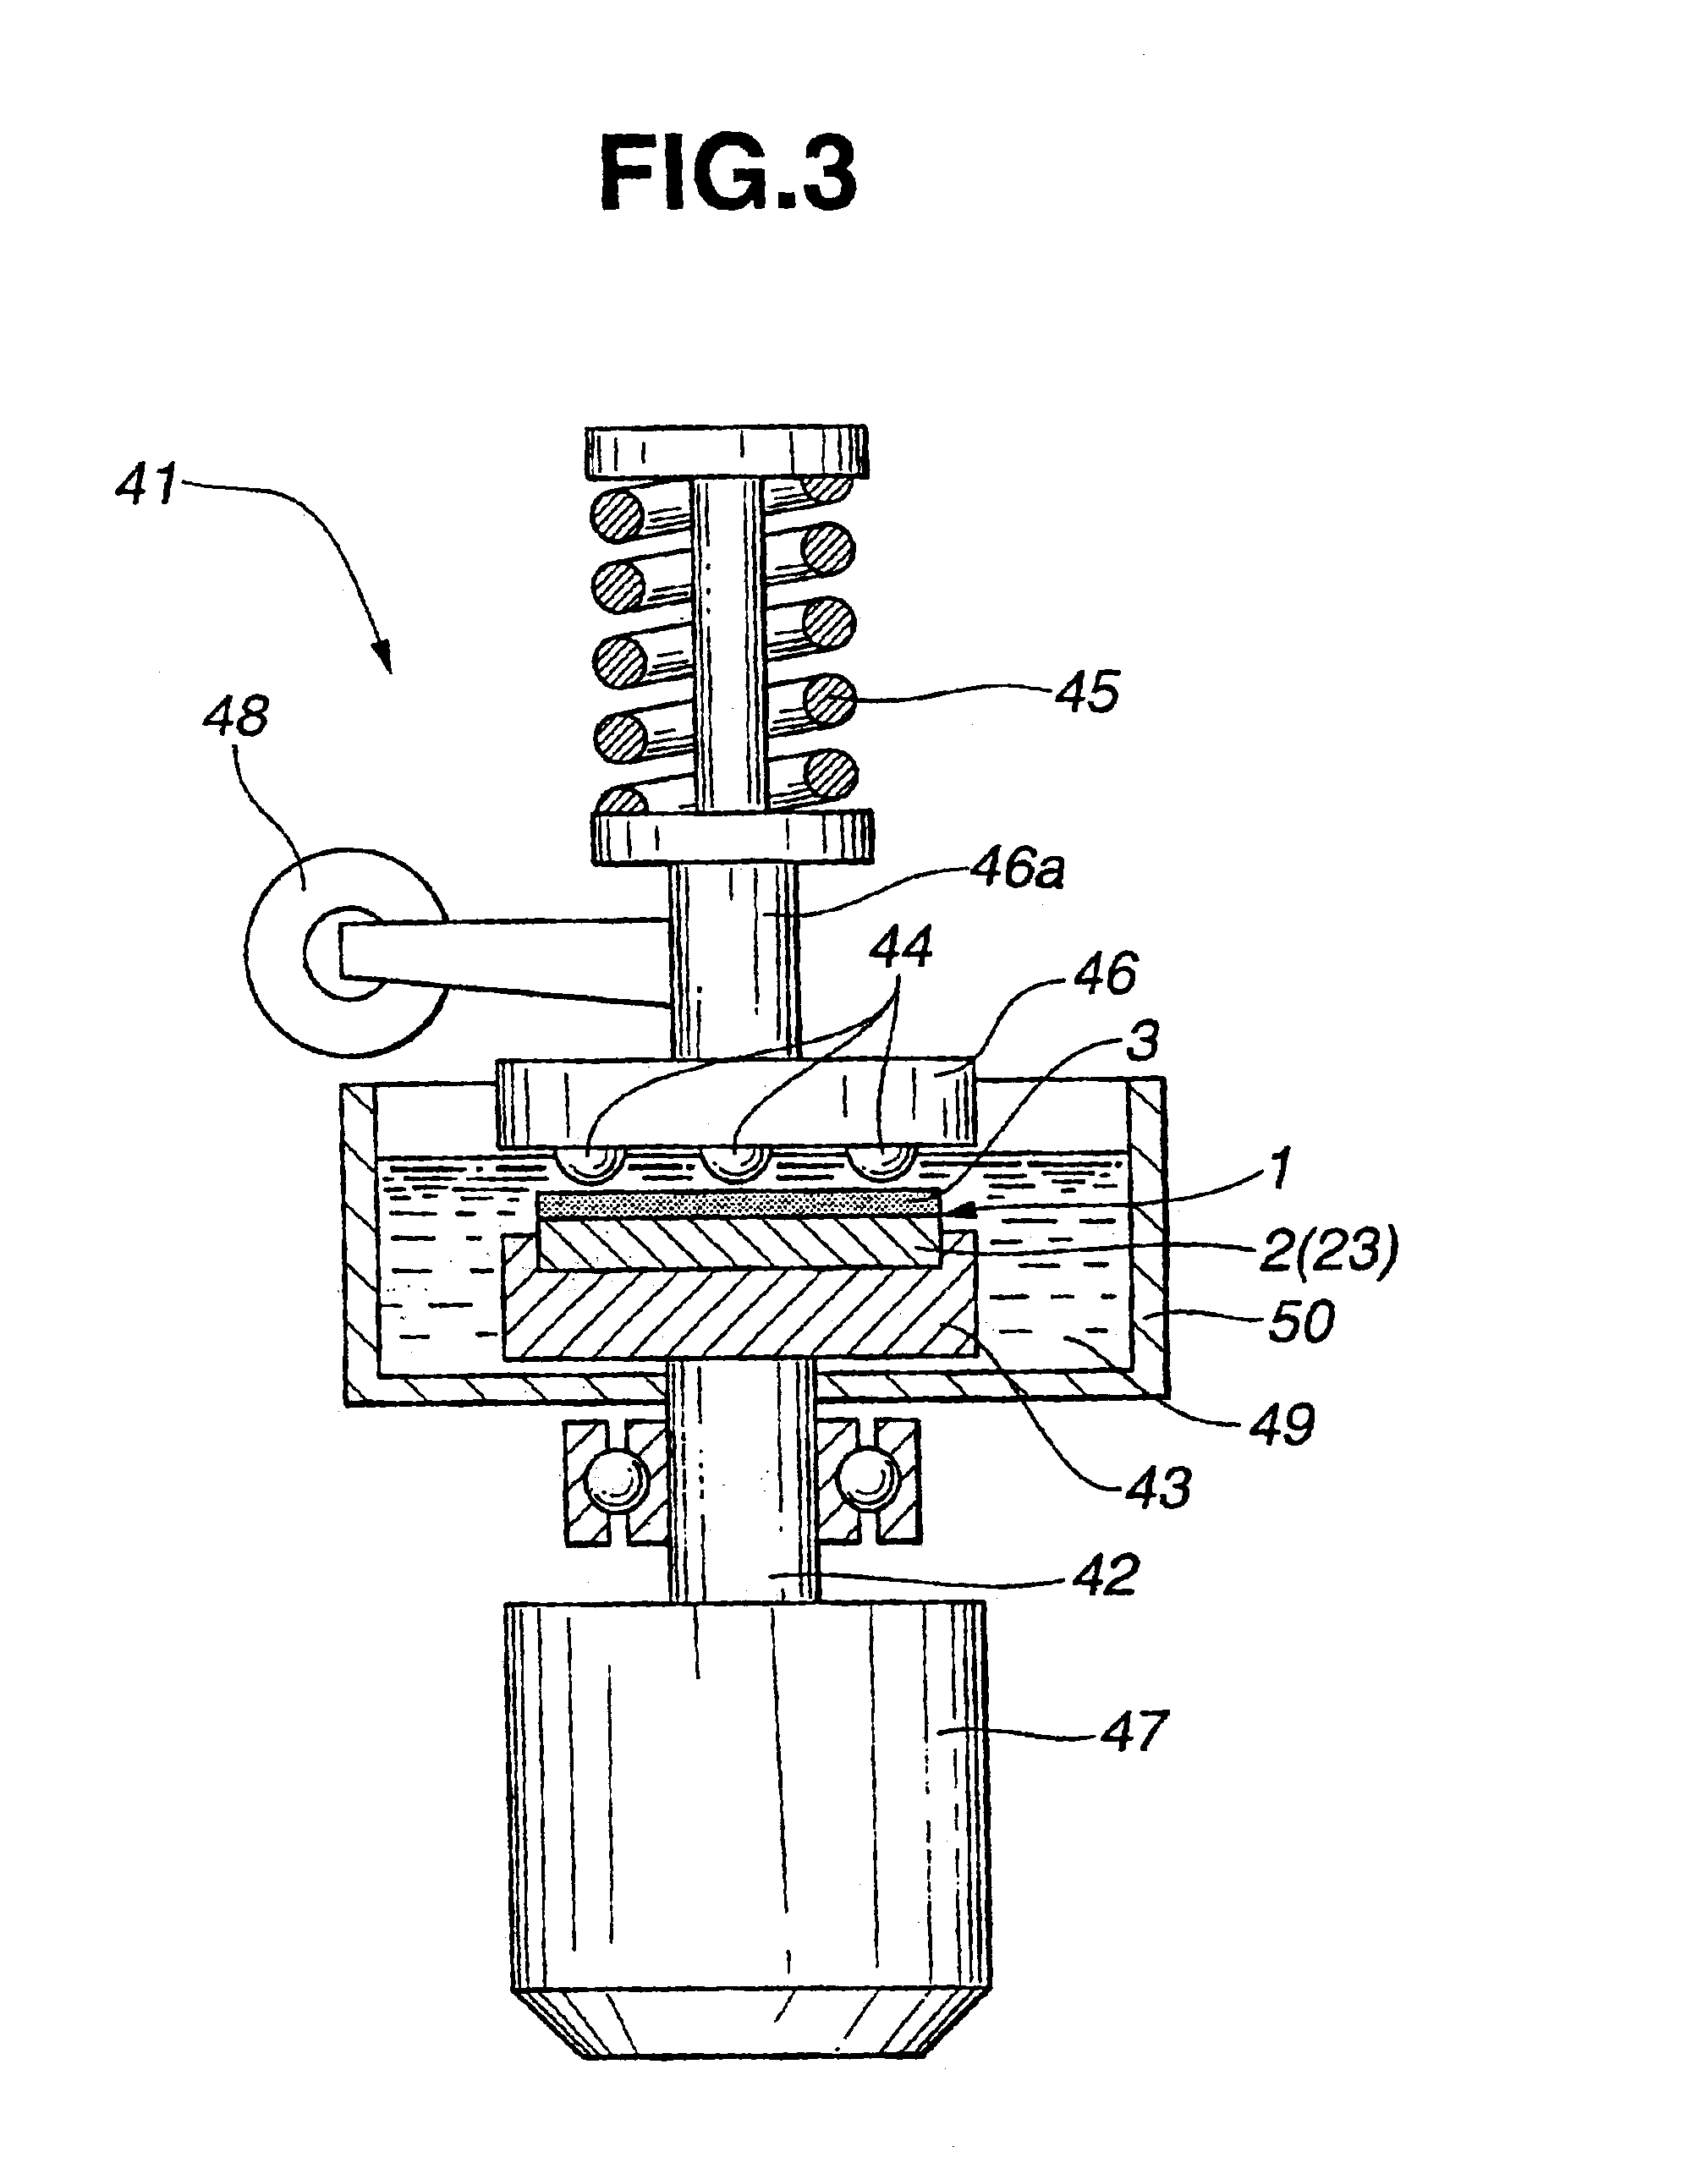 Slidably movable member and method of producing same